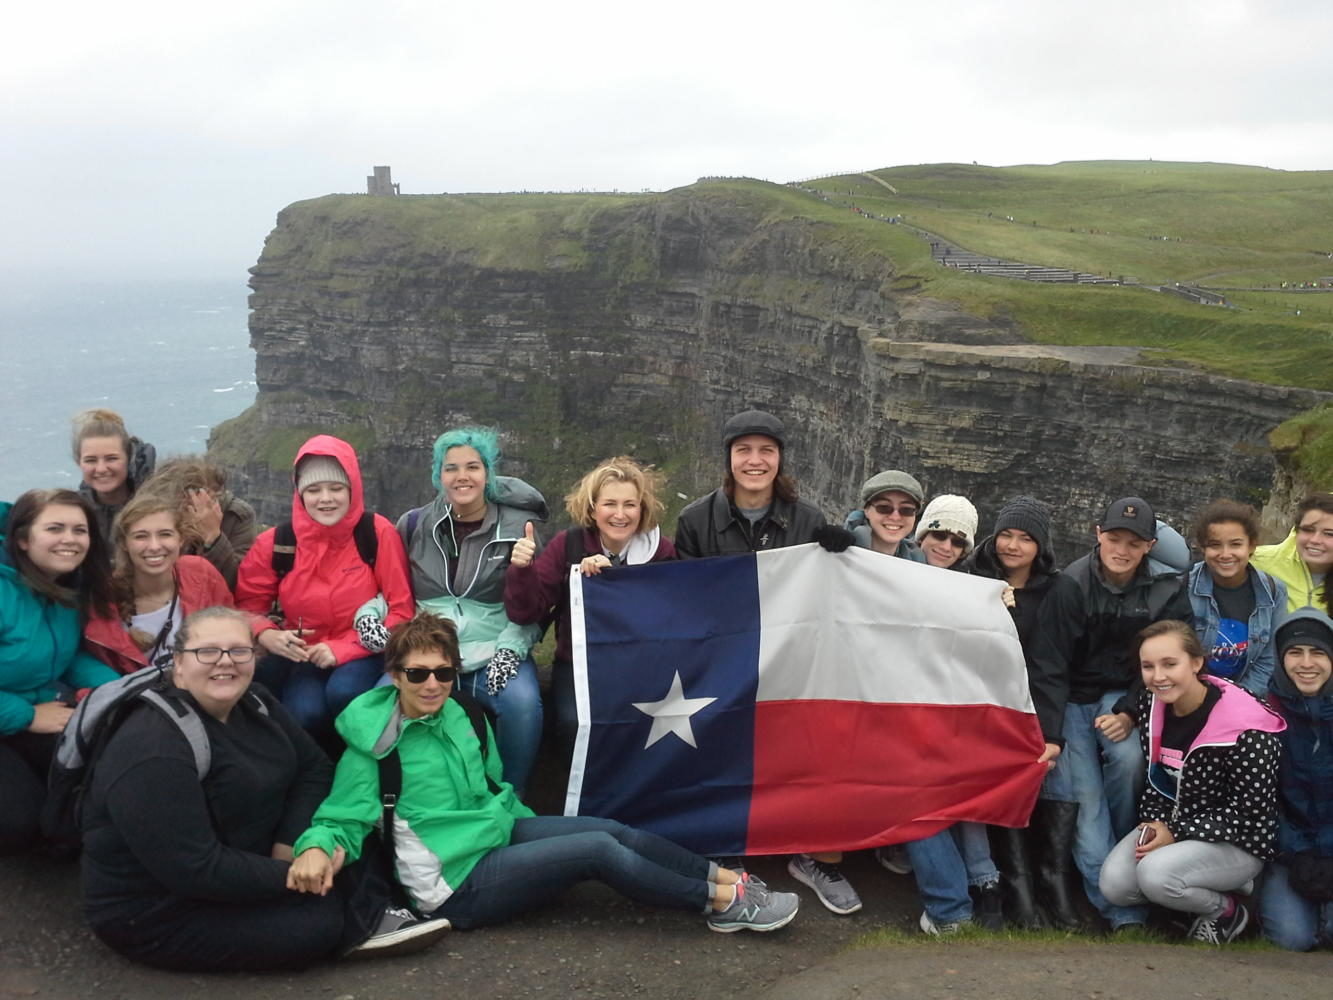 Mrs. Weston and the 16 students on the Cliffs of Moher, with a 700 foot drop behind them.